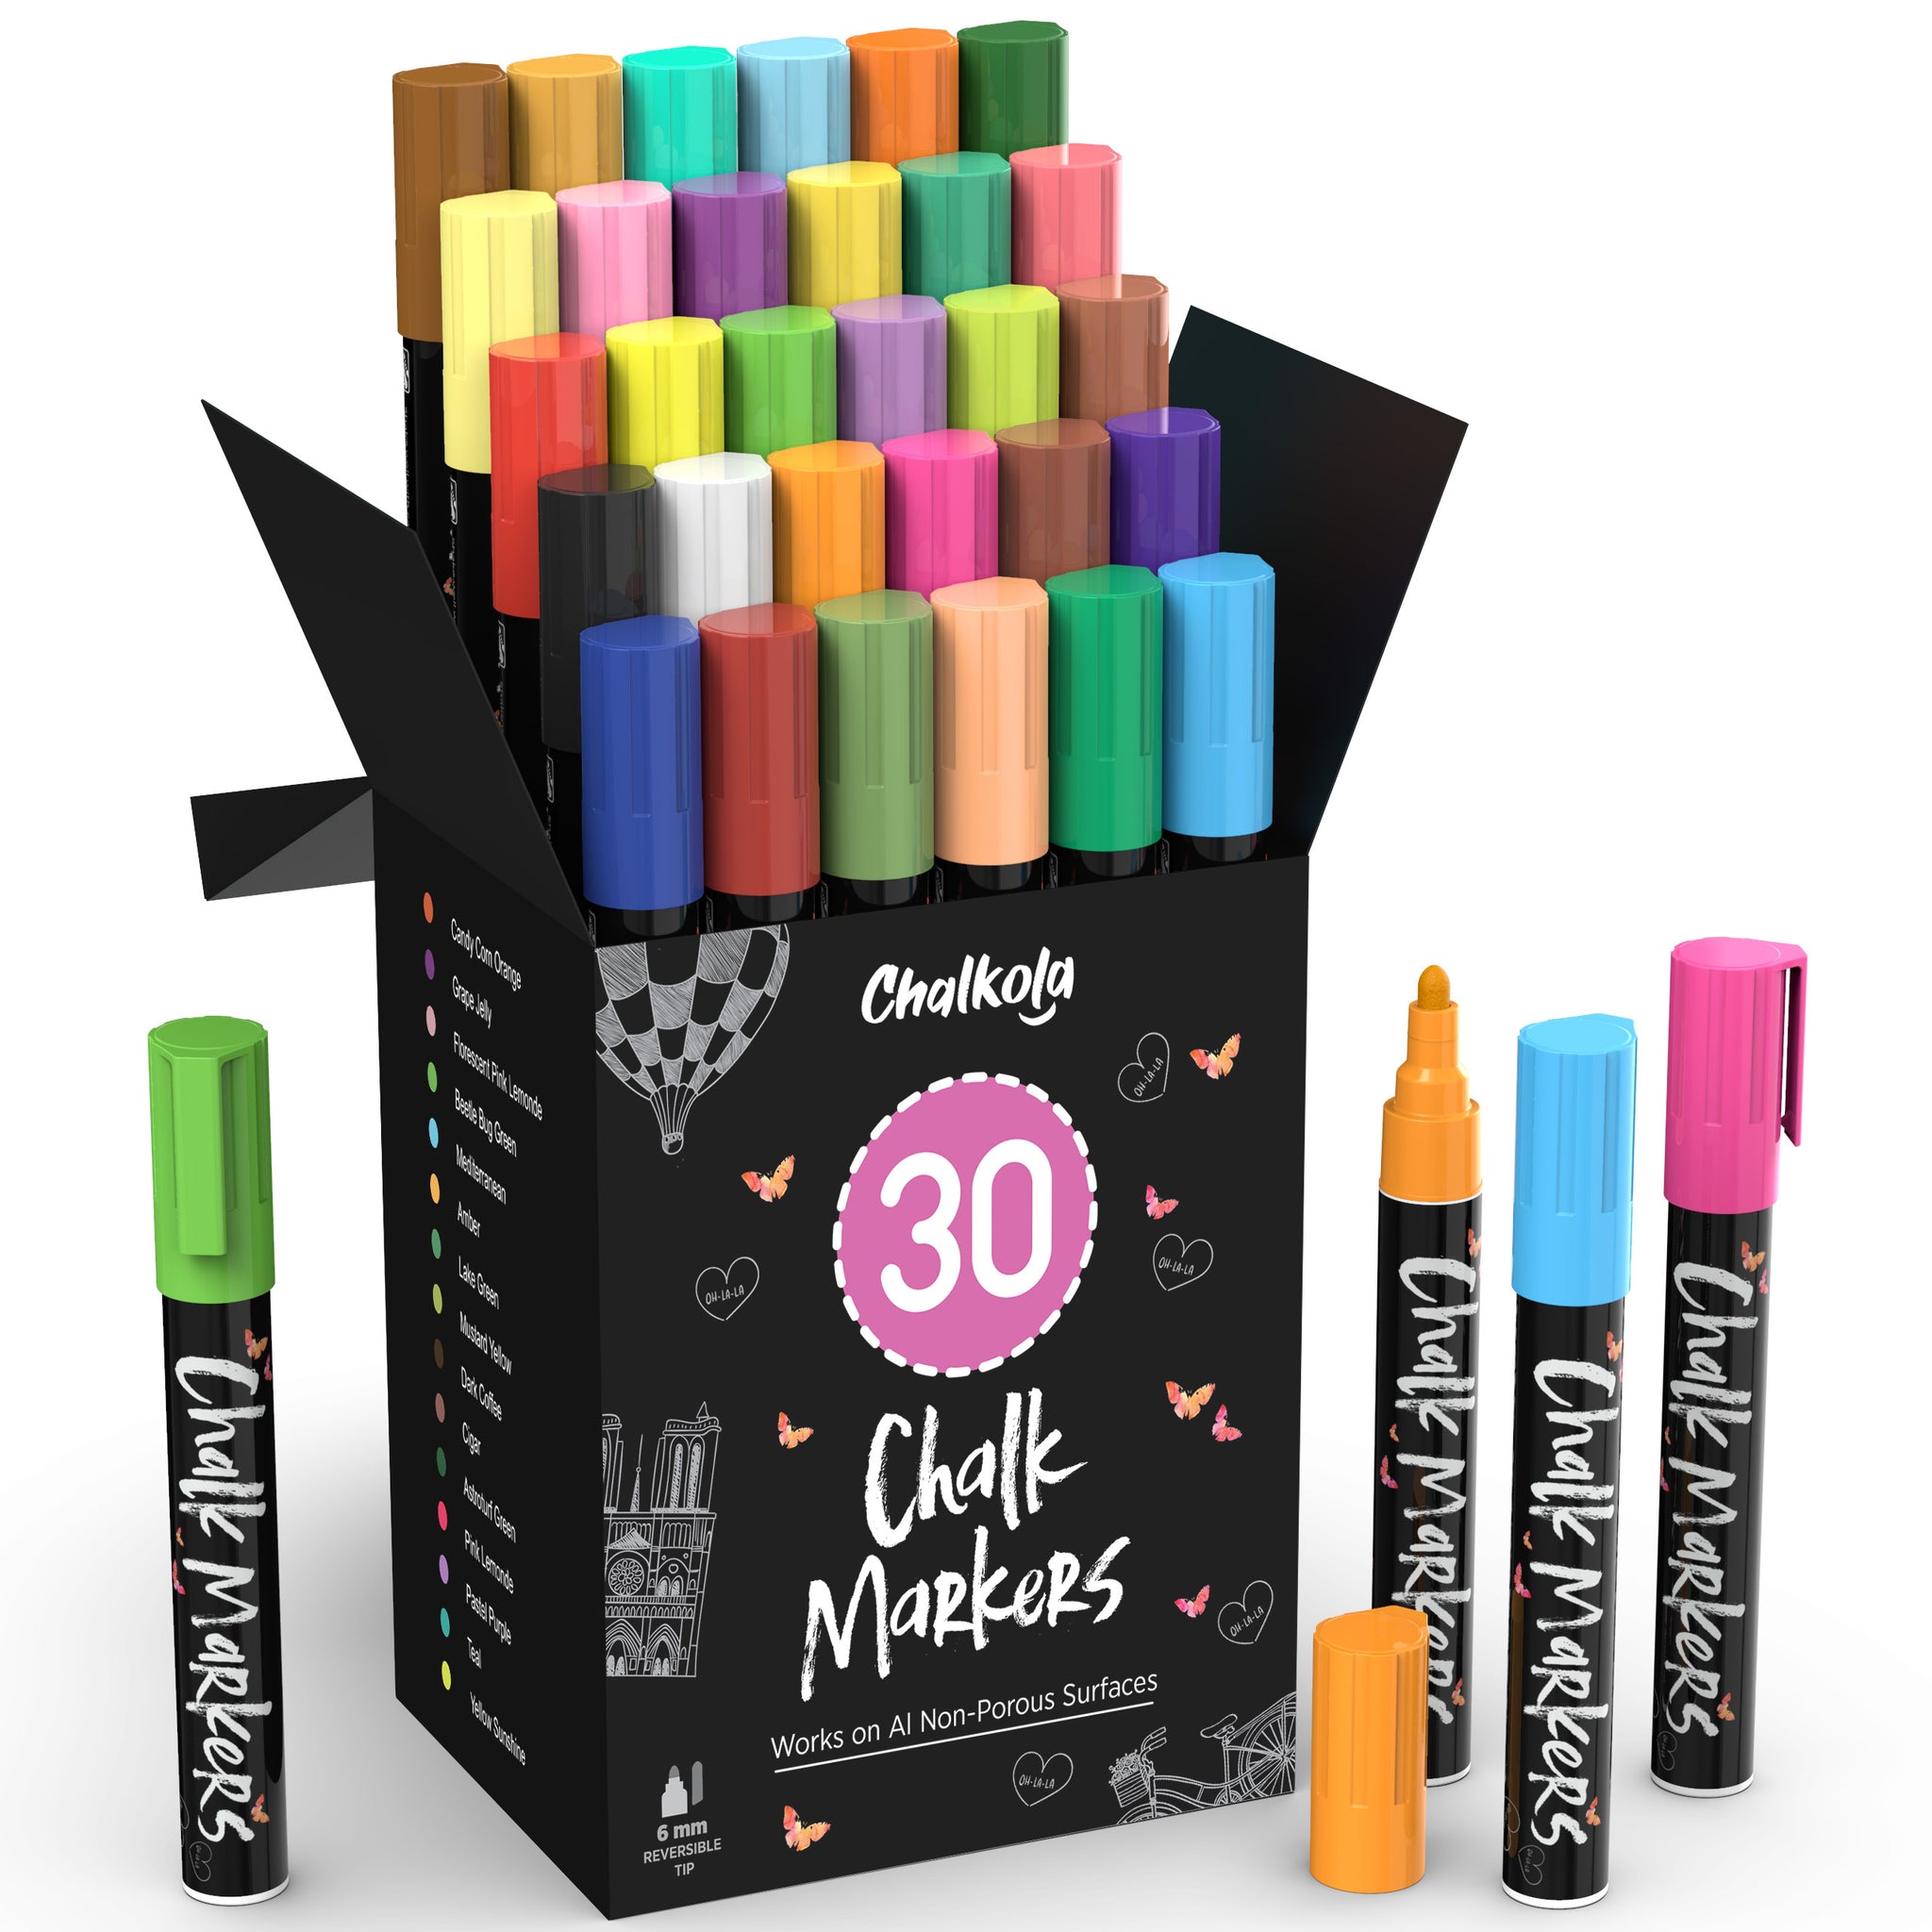 Chalkola Markers and Highlighters in Office Supplies for Businesses 